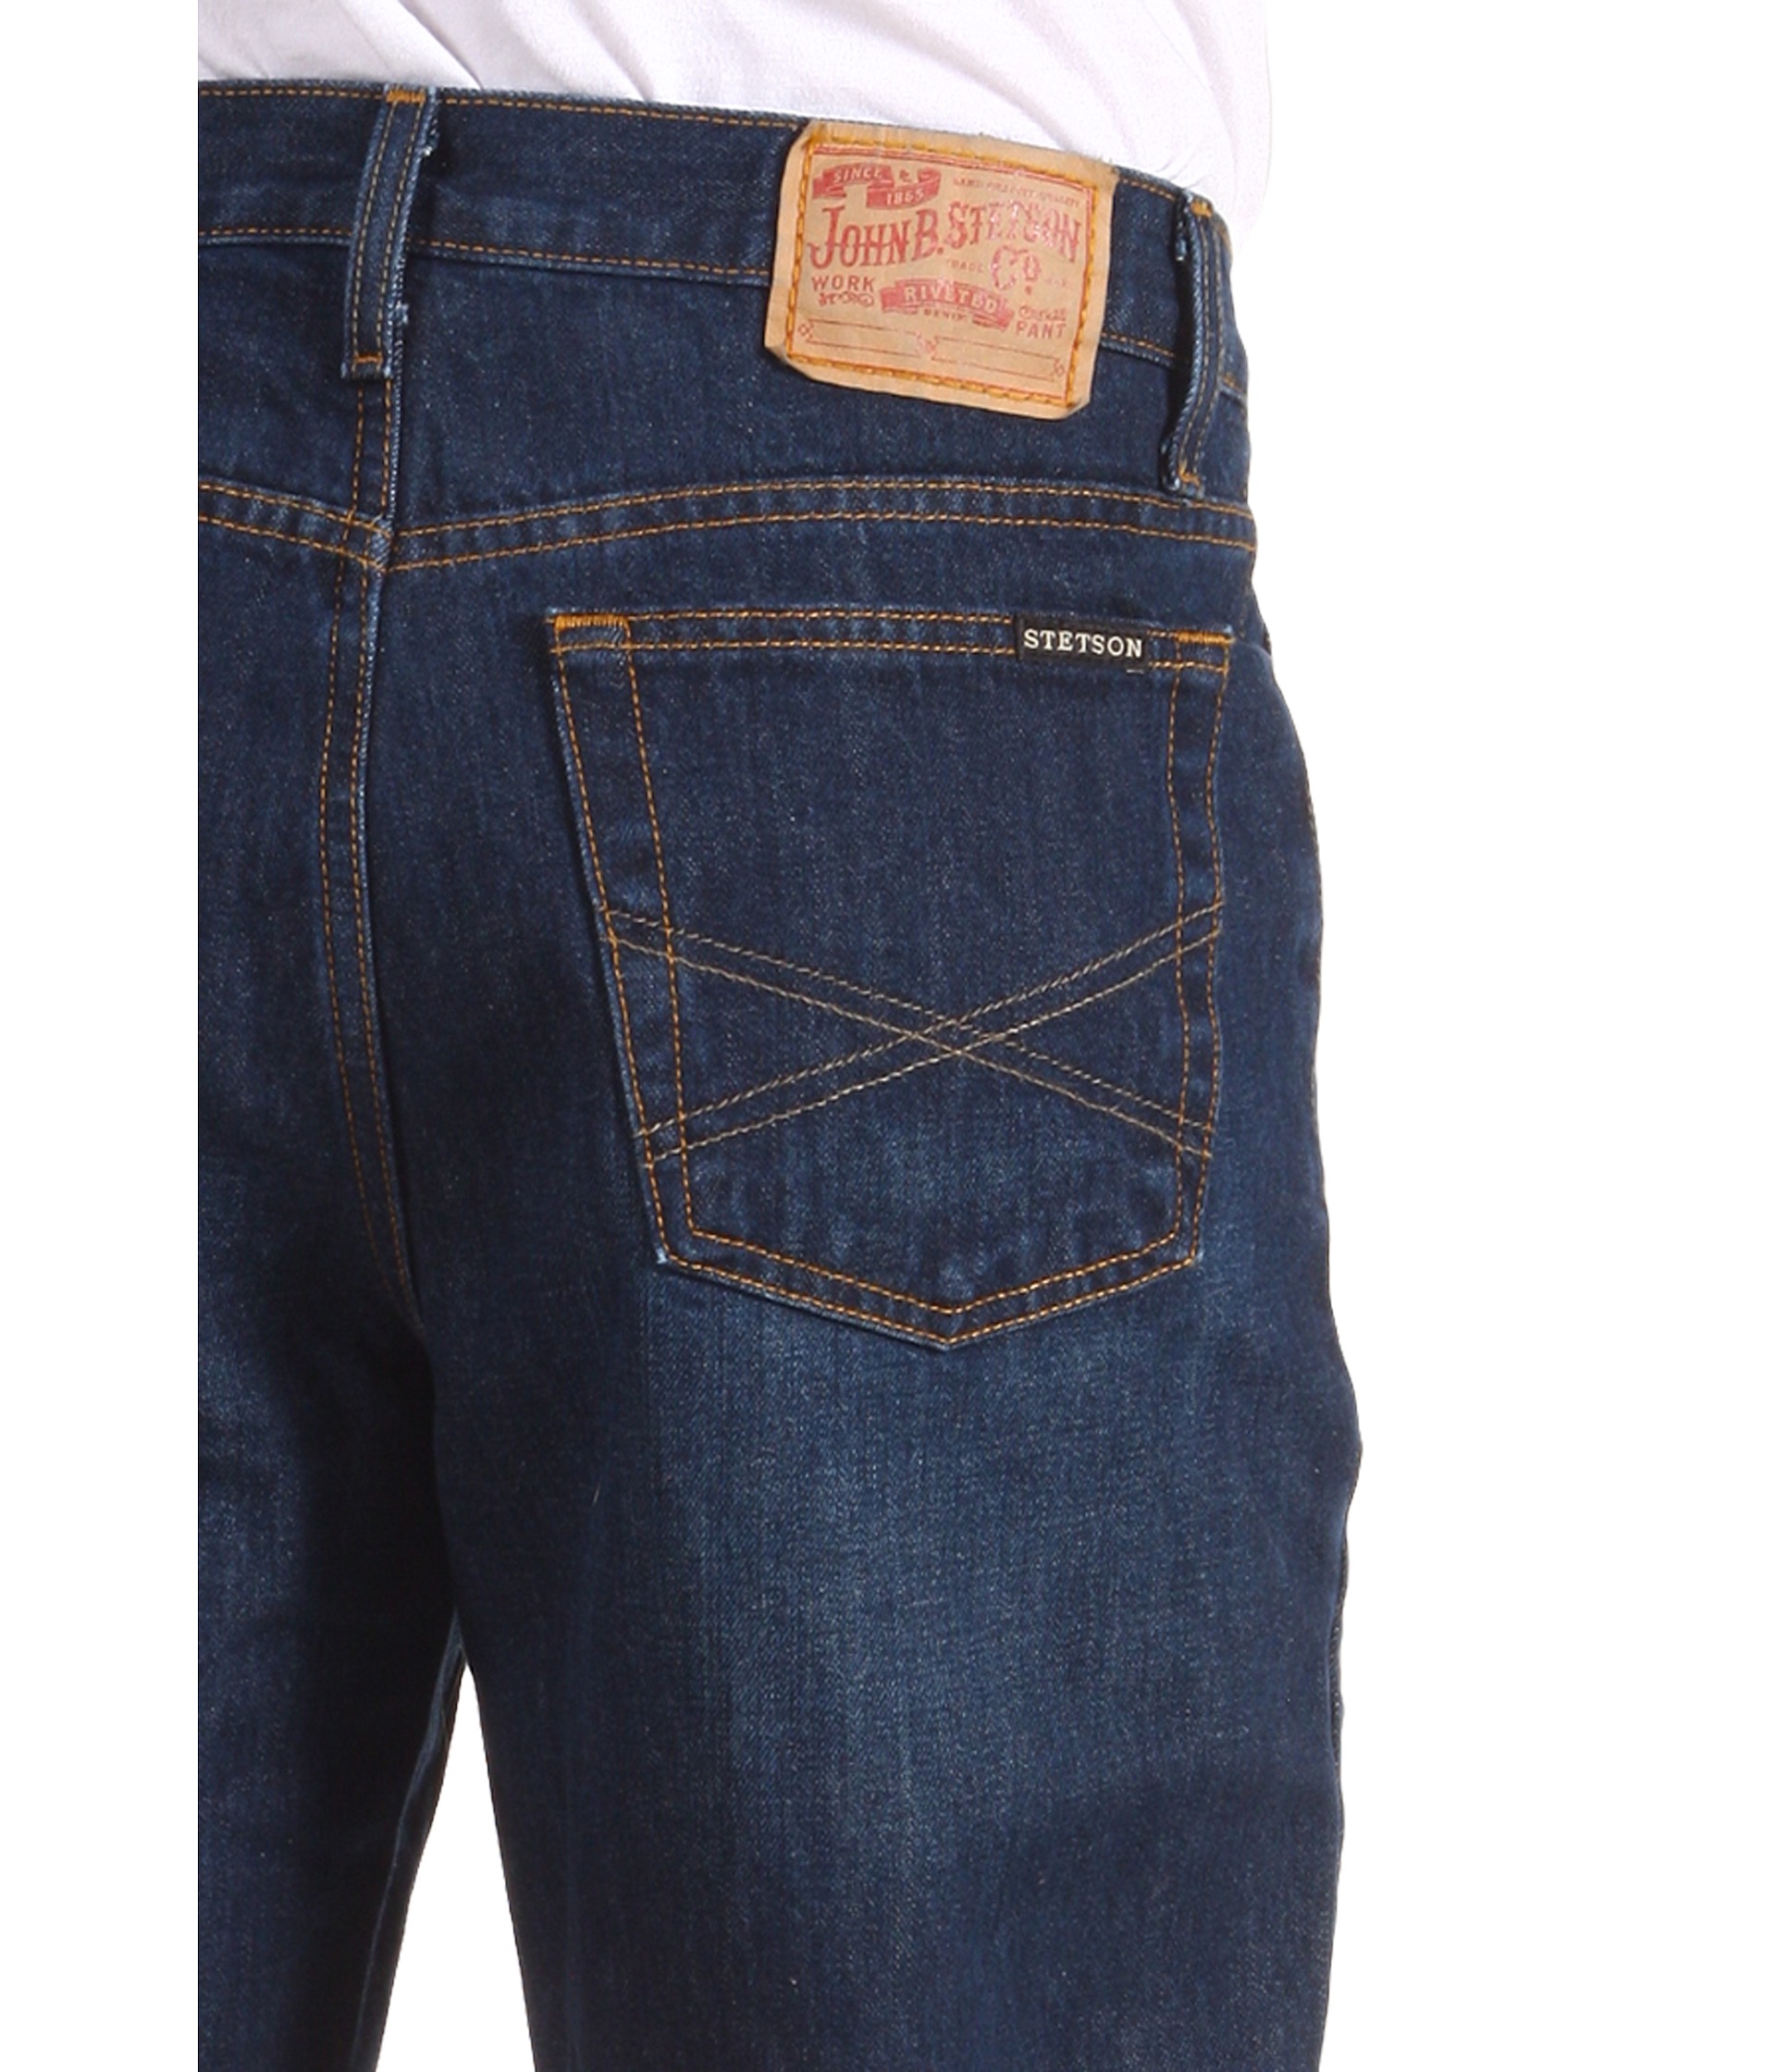 Stetson 1520 Fit Jean at Zappos.com